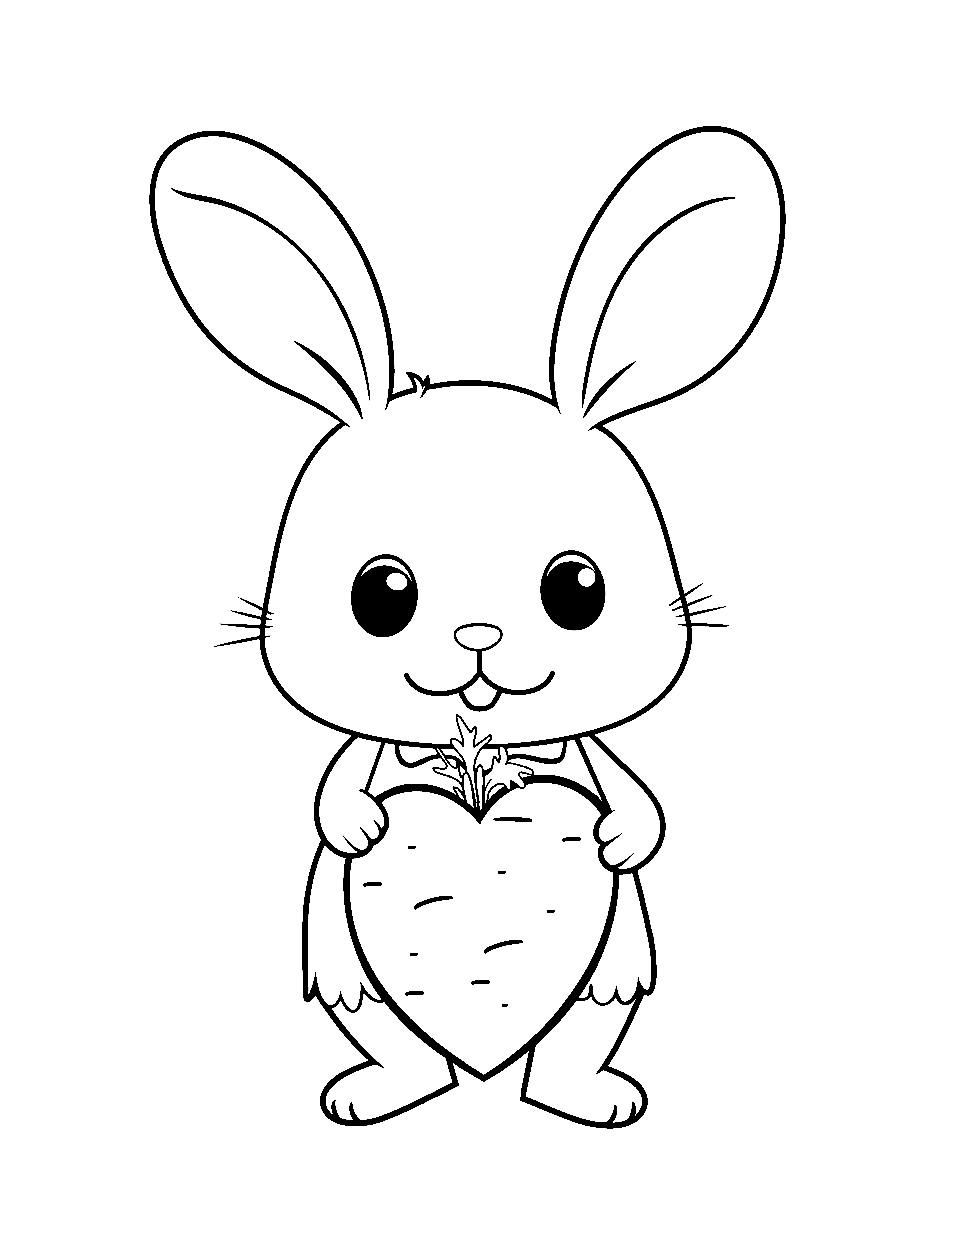 Bunny Holding a Carrot Heart Coloring Page - A bunny clutching a carrot shaped like a heart.